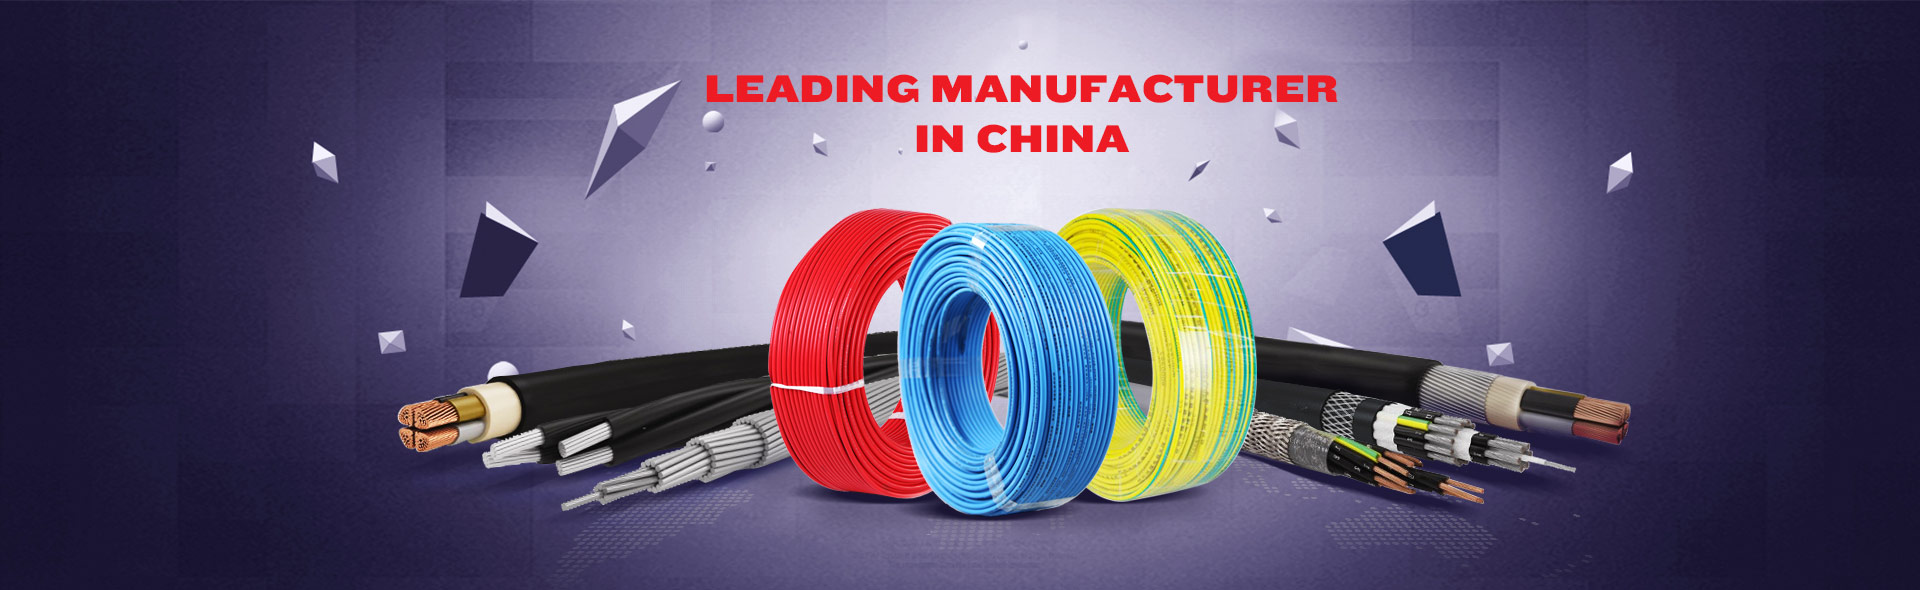 electric wire,electrical cable,pvc cable,aluminum cable,flexible flat cable,single core flexible Cable,twin and earth Cable,aluminum flat Cable